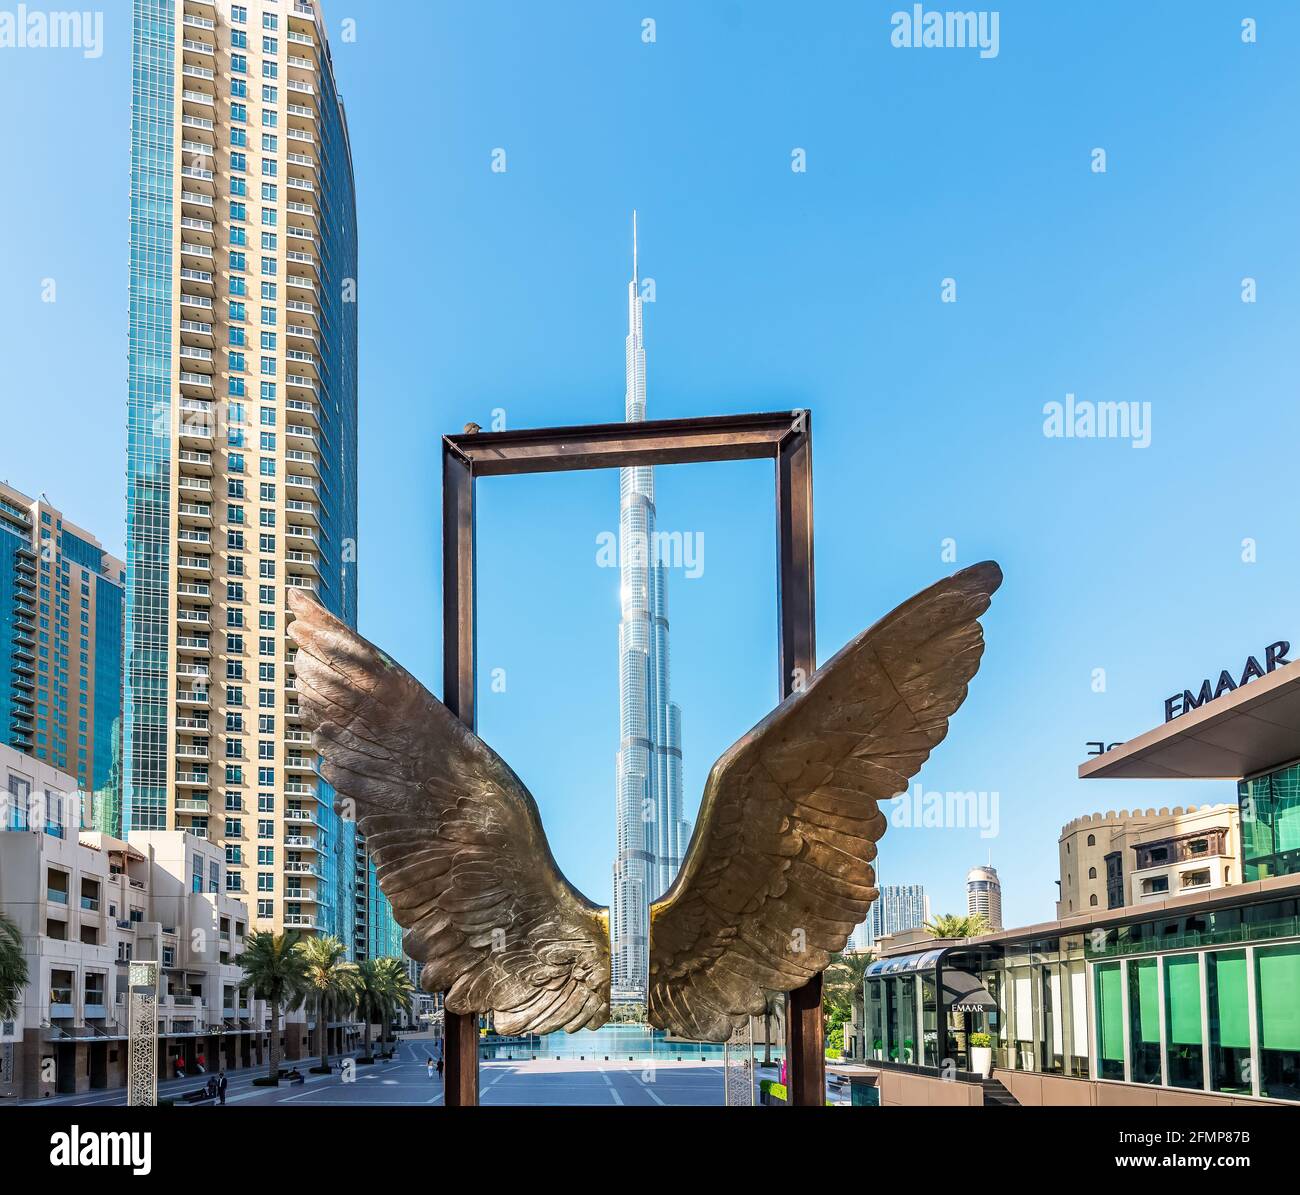 Dubai, UAE - November 30, 2020: The Wings of Mexico modern sculpture by Jorge Marin and Burj Khalifa building is in the background. Stock Photo